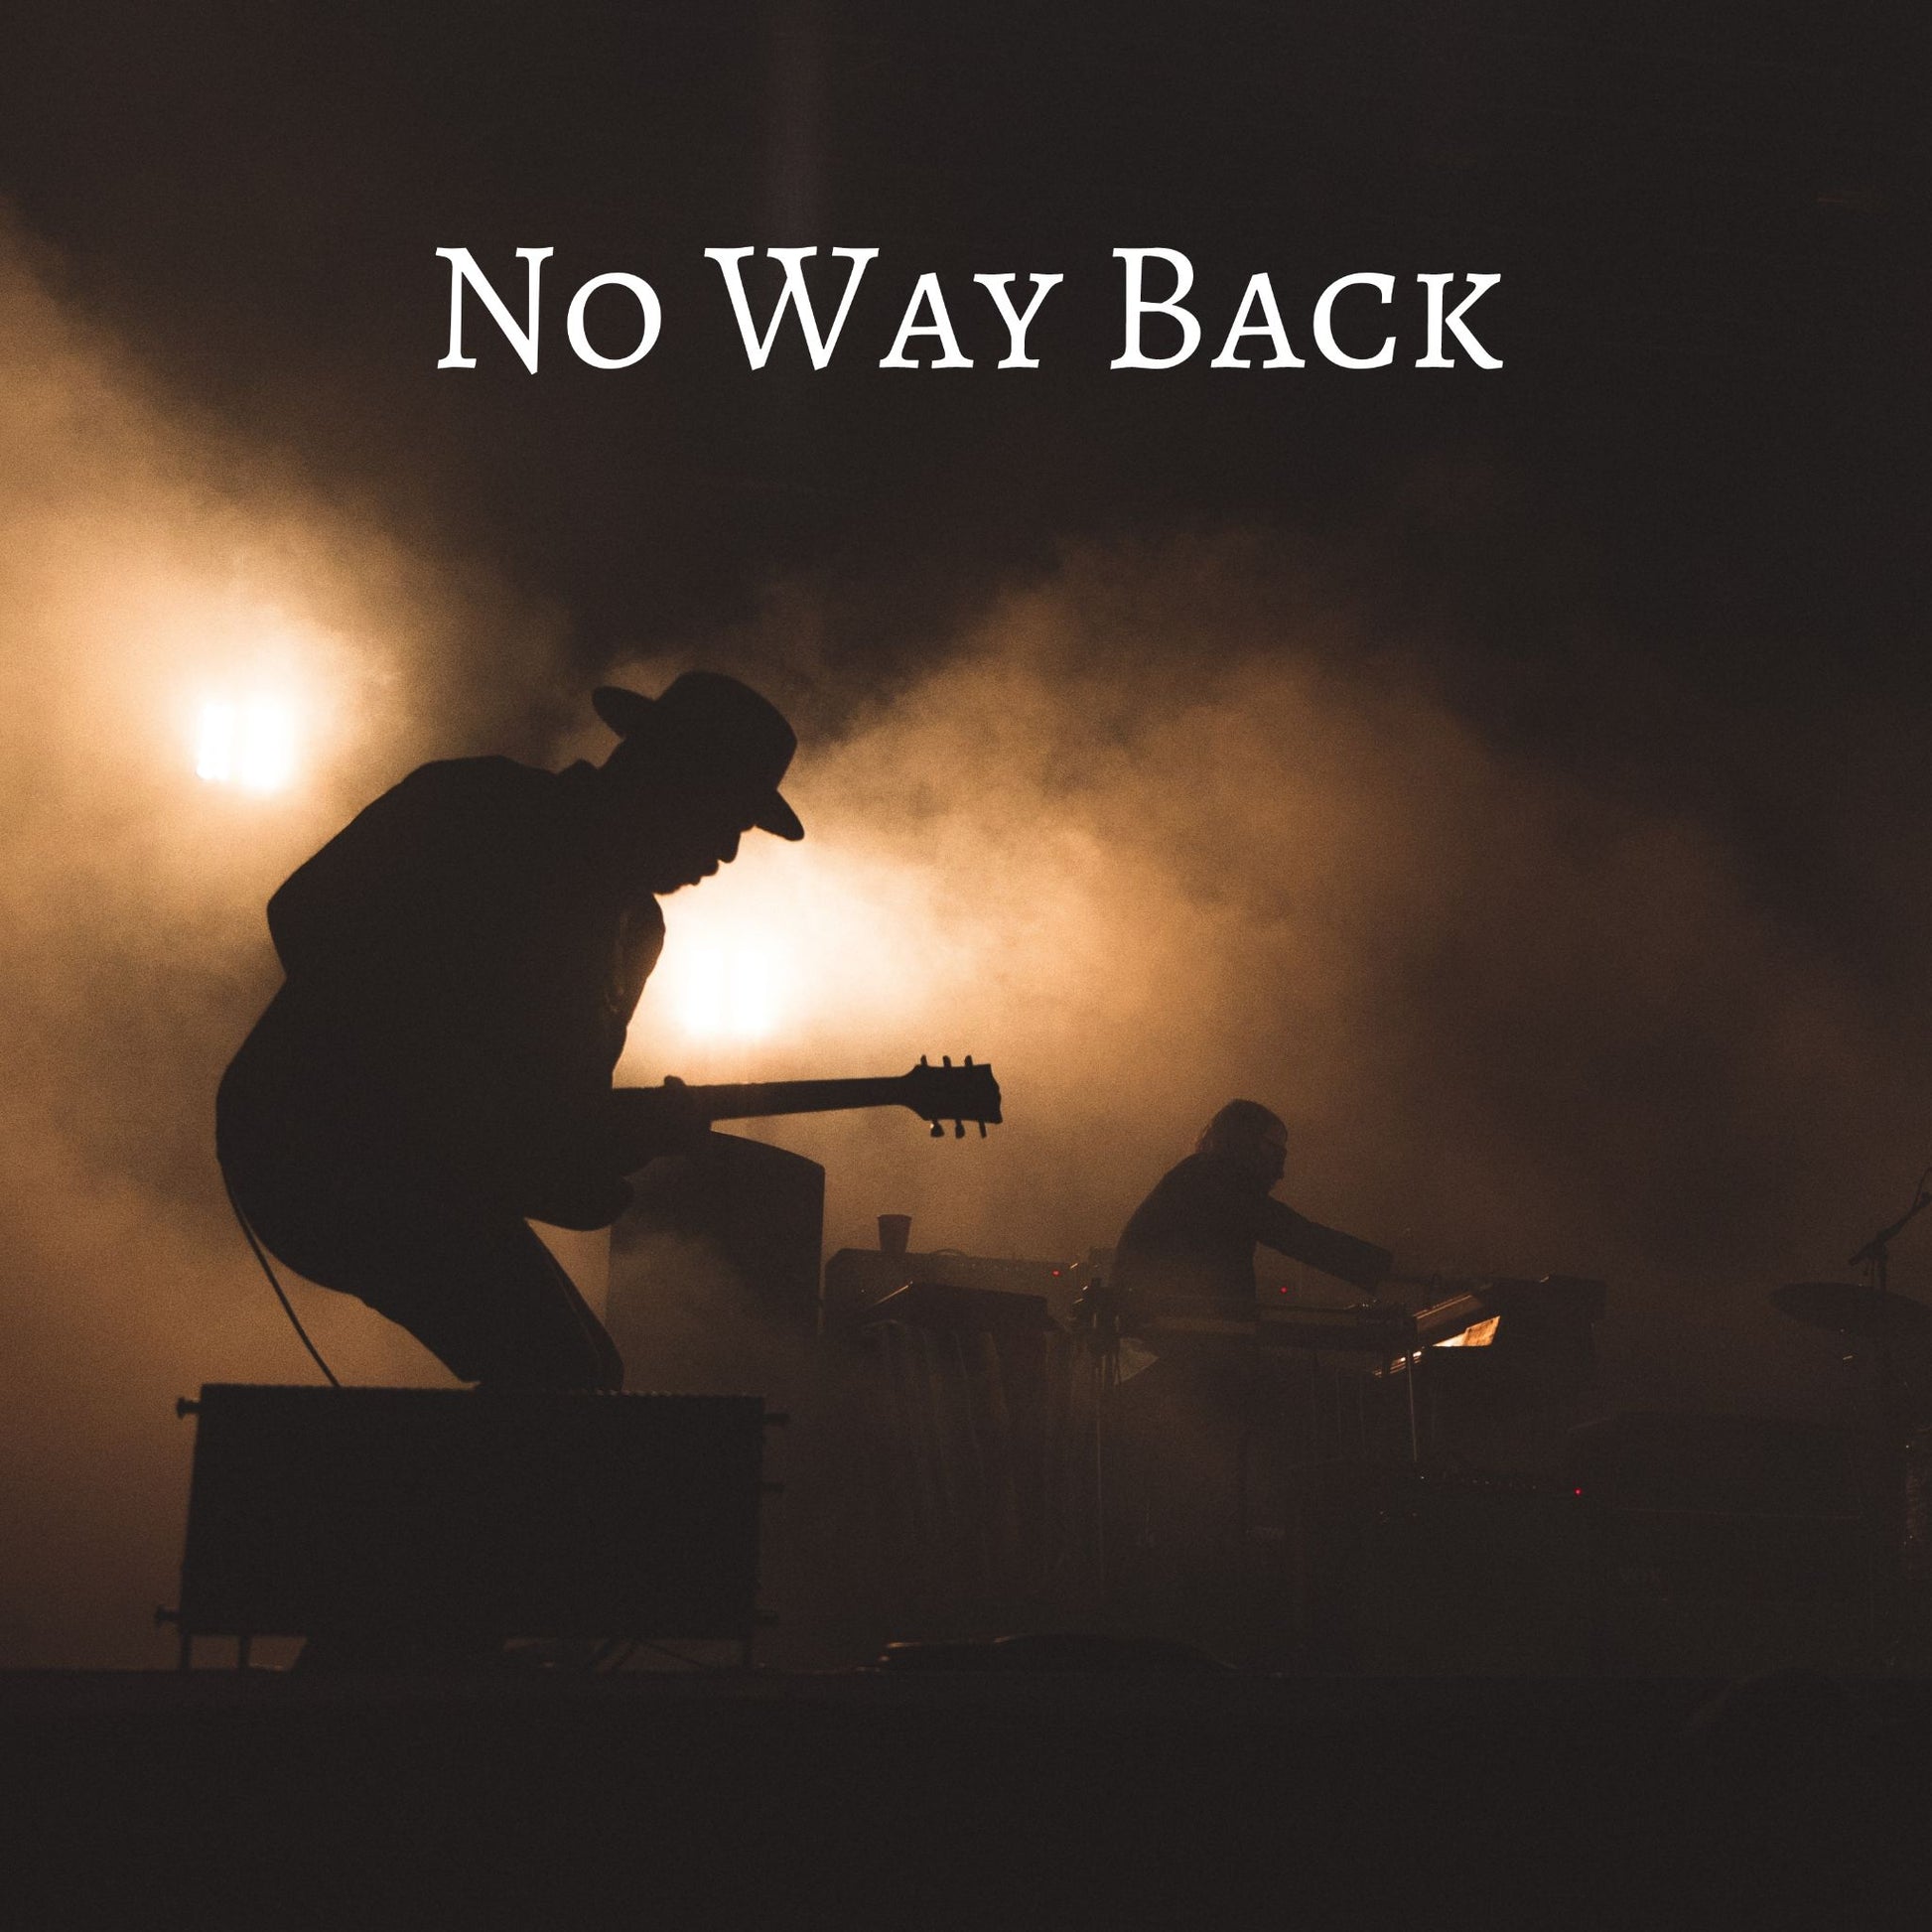 CD Cover of song No Way Back